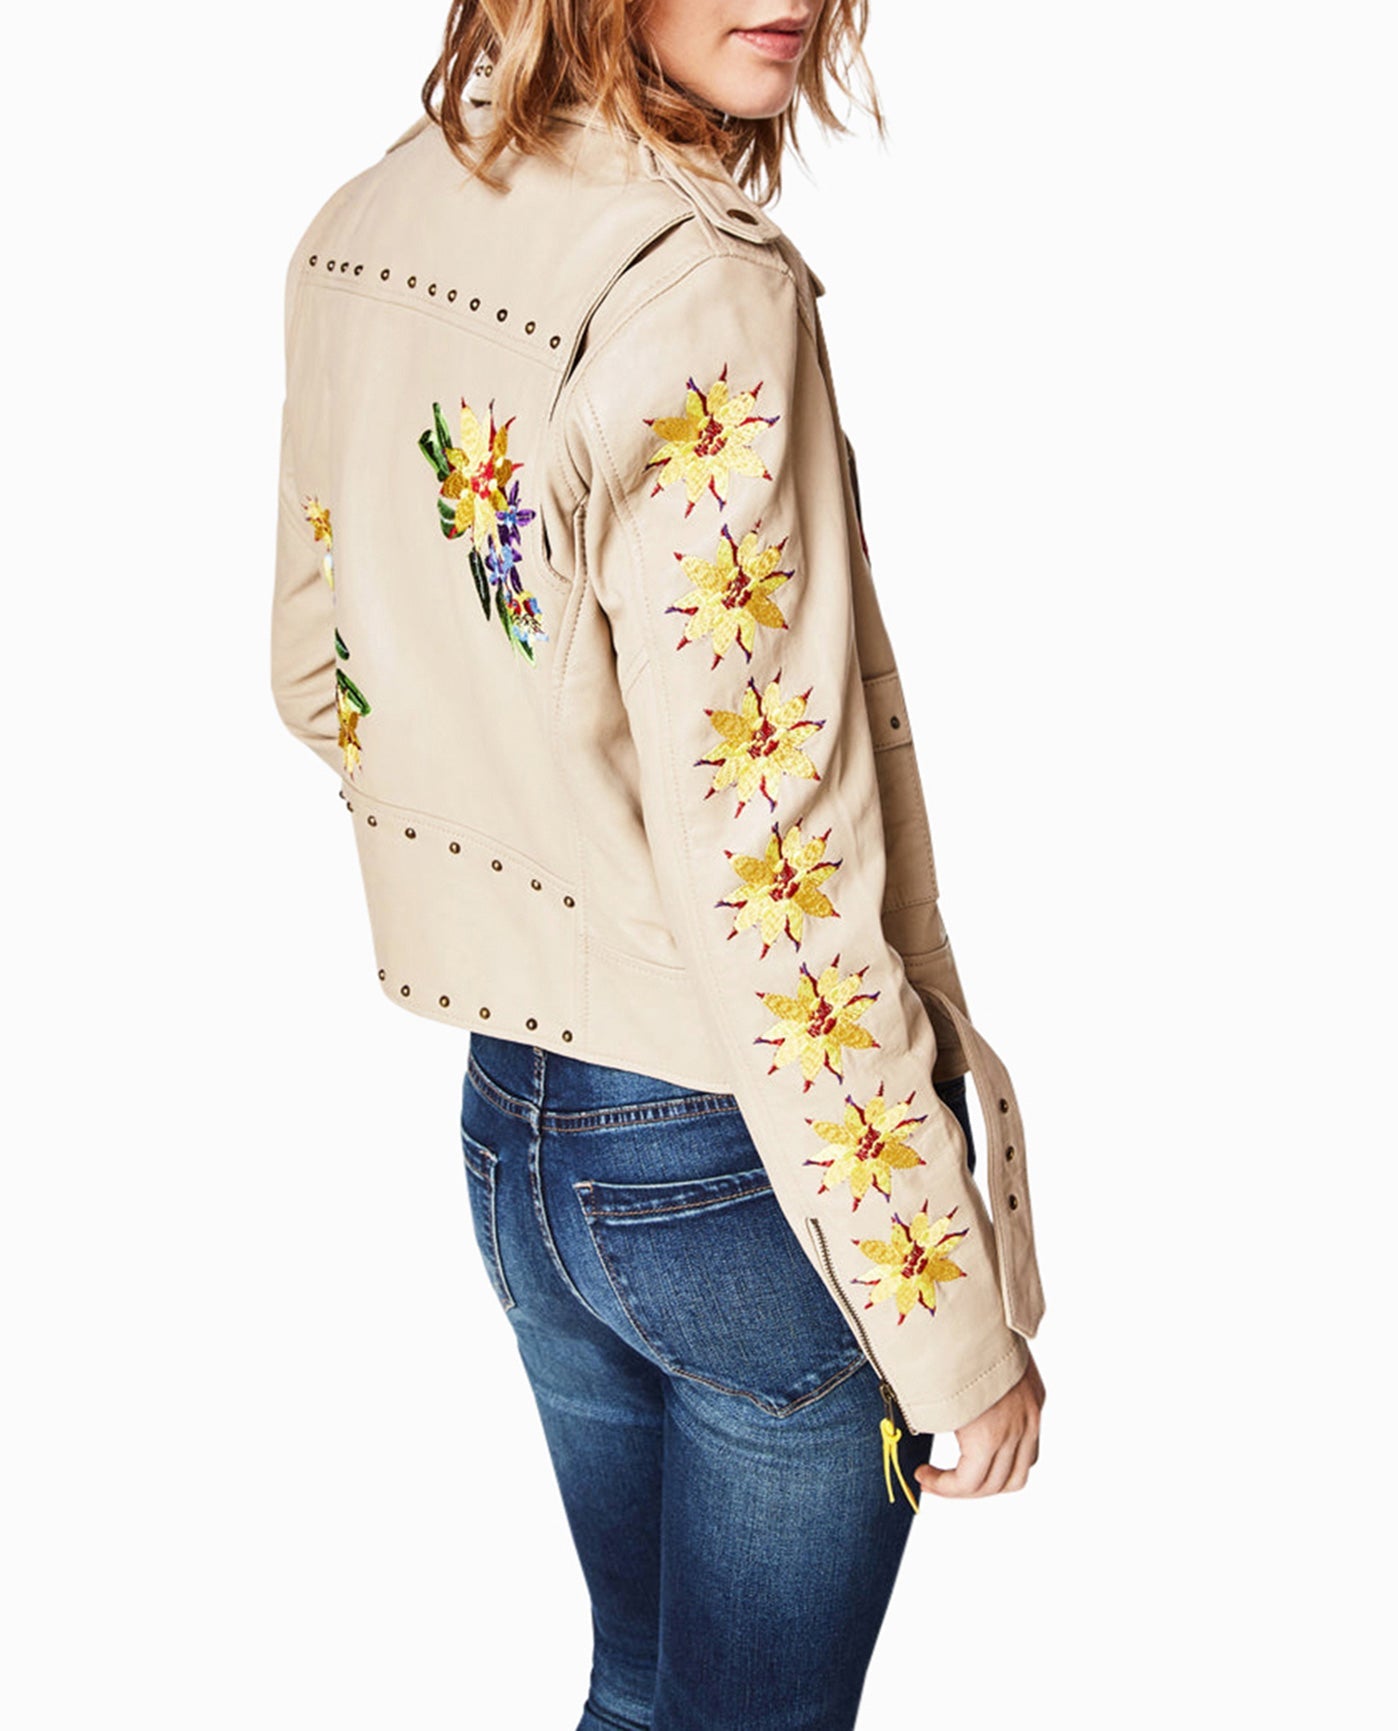 FLORAL EMBROIDERY ON SLEEVE AND BACK | SAFARI SAND